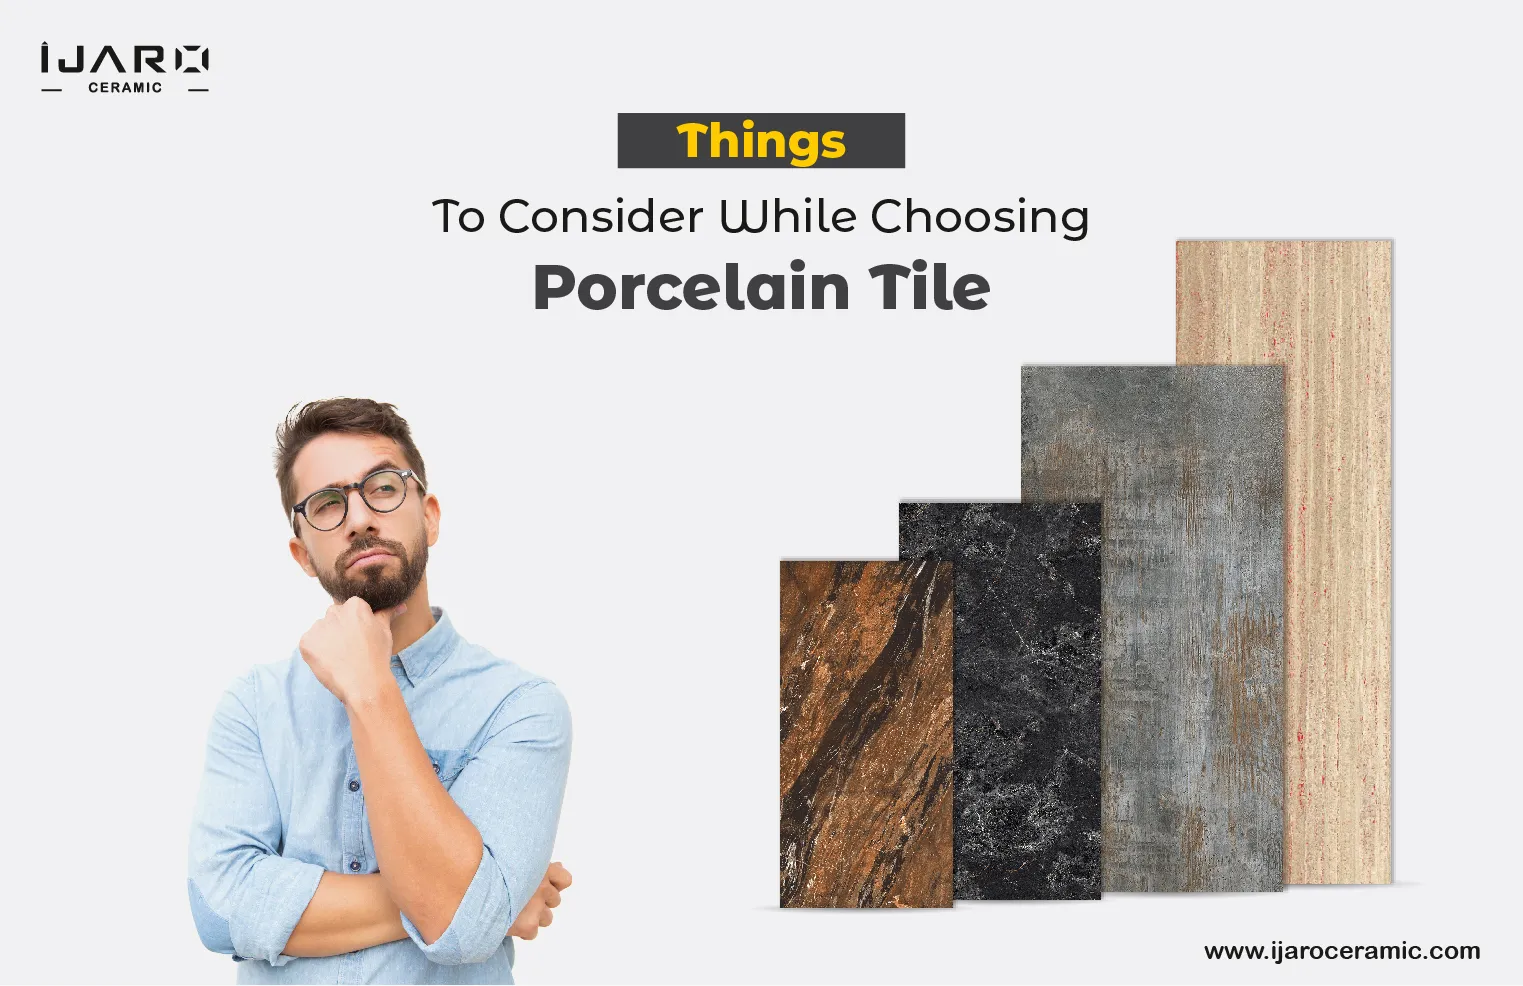 Things to Consider While Choosing Porcelain Tile